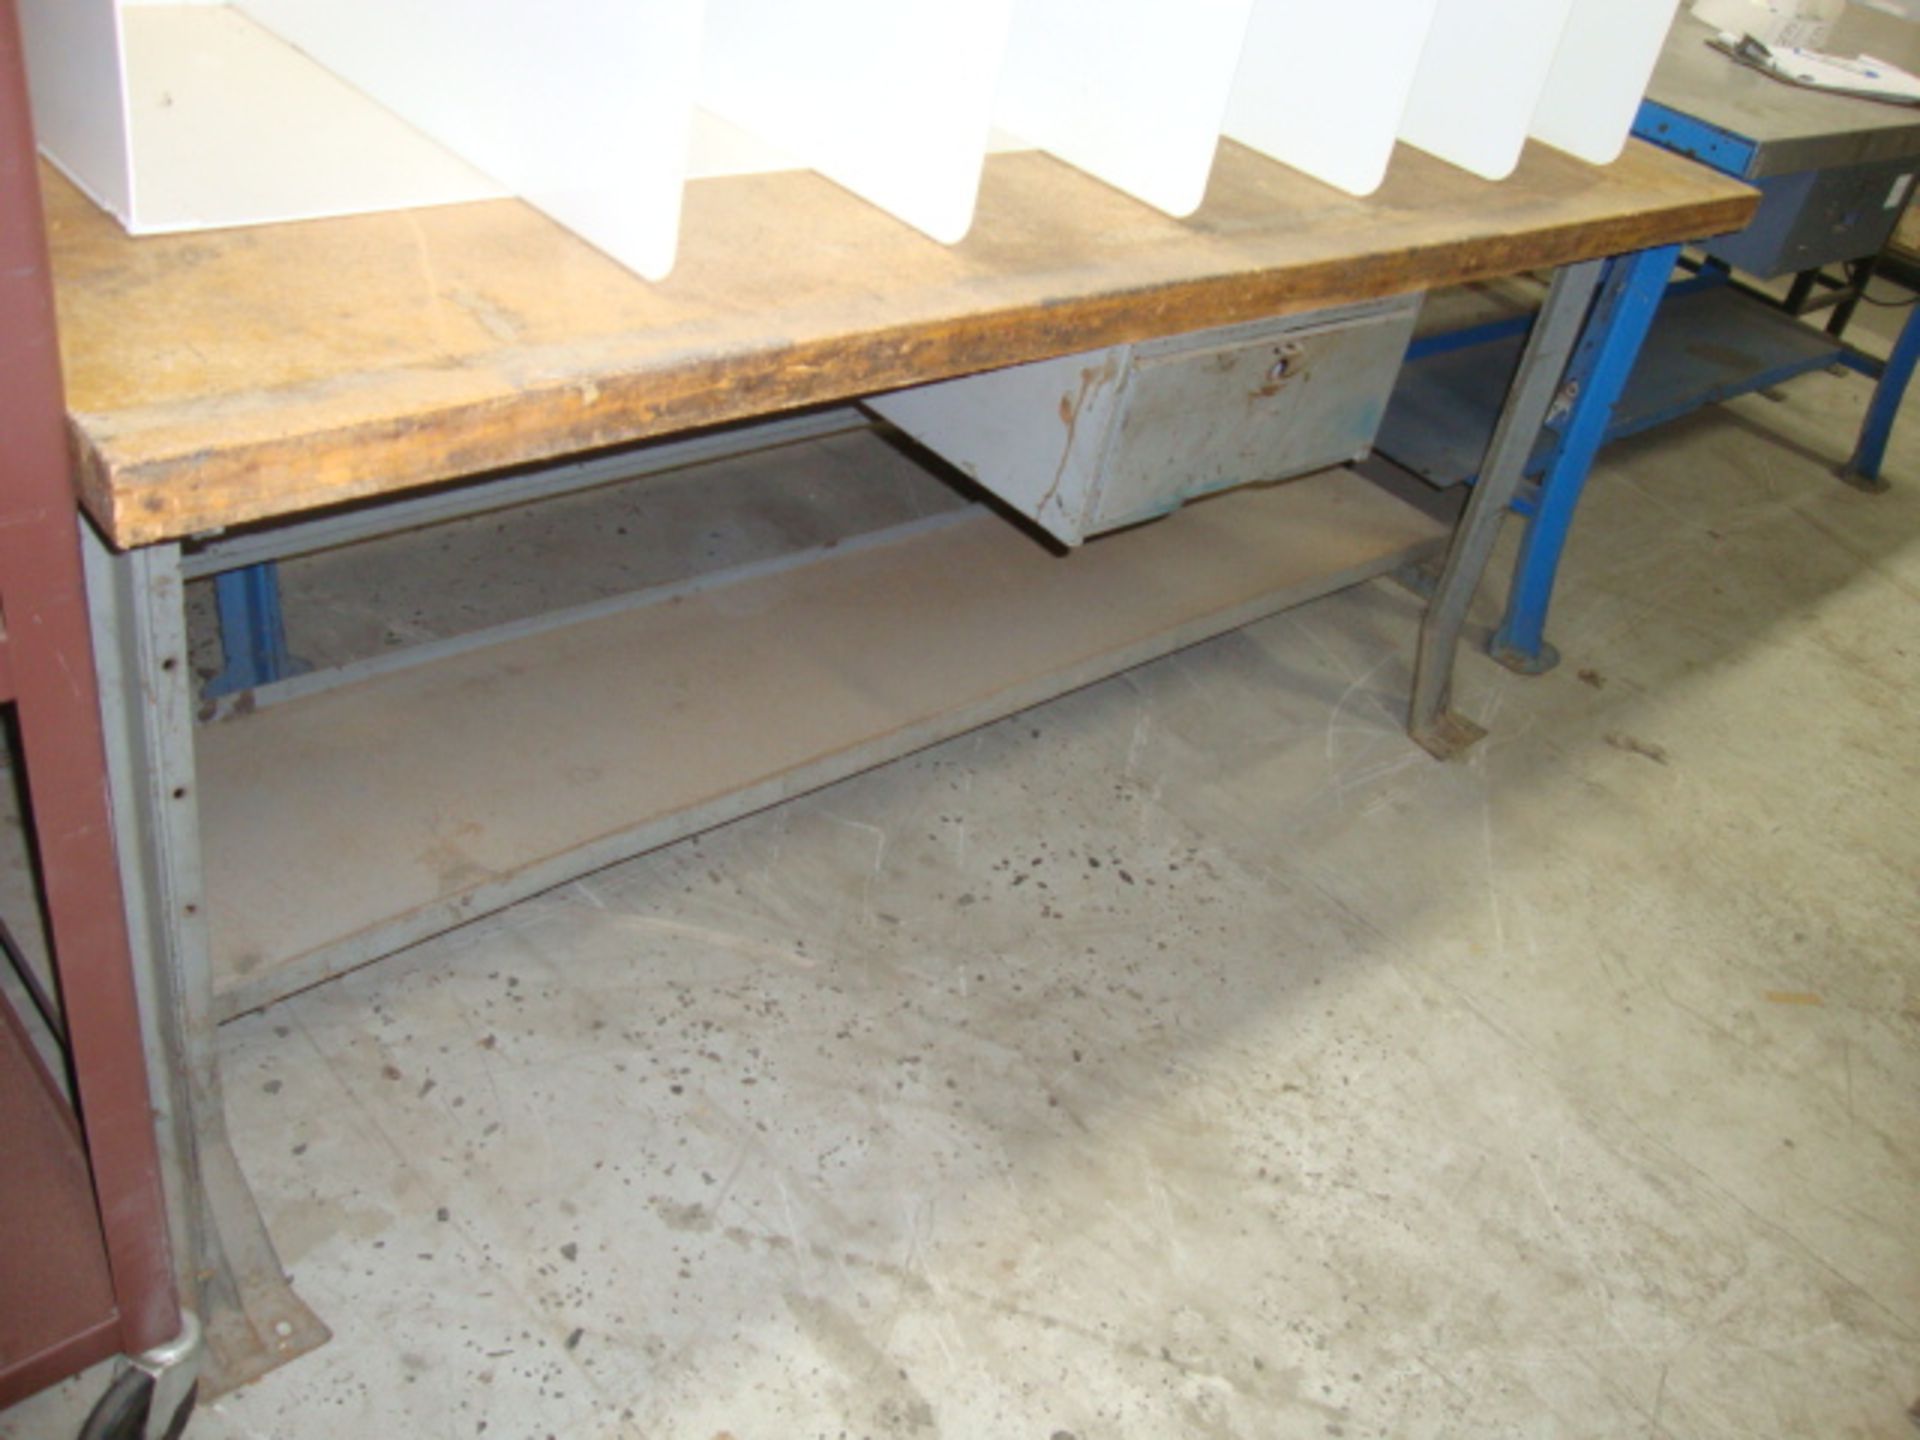 HD Workbench, approx. 72" x 30" x 28" tall - Image 2 of 3